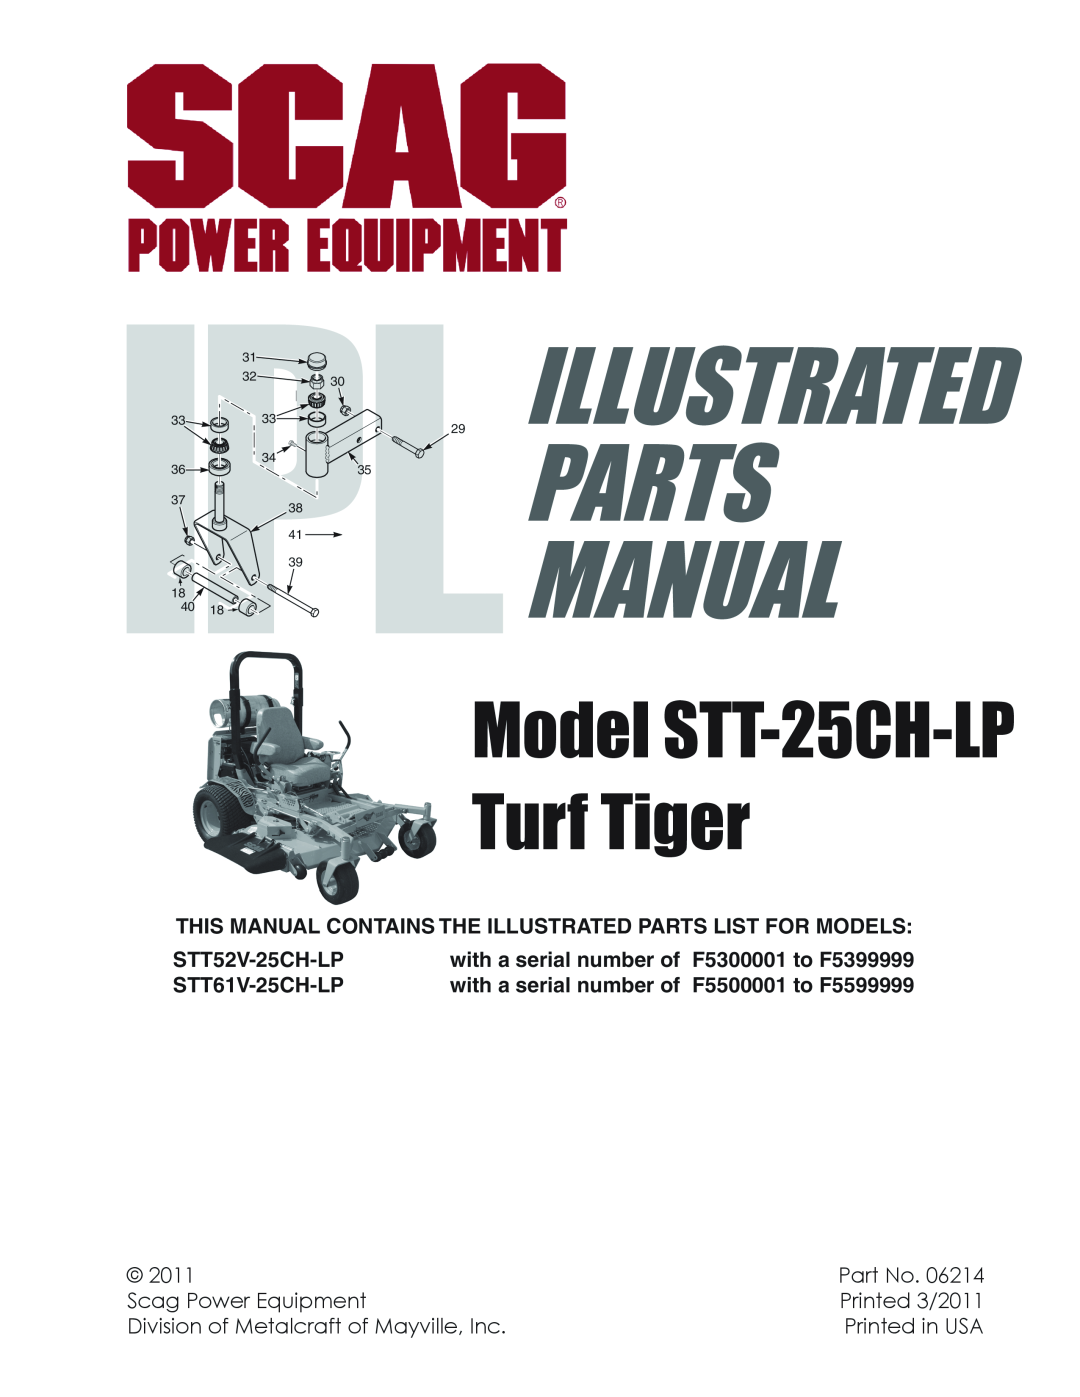 Scag Power Equipment STT-25CH-LP manual STT52V-25CH-LP, with a serial number of, F5300001 to F5399999, STT61V-25CH-LP 